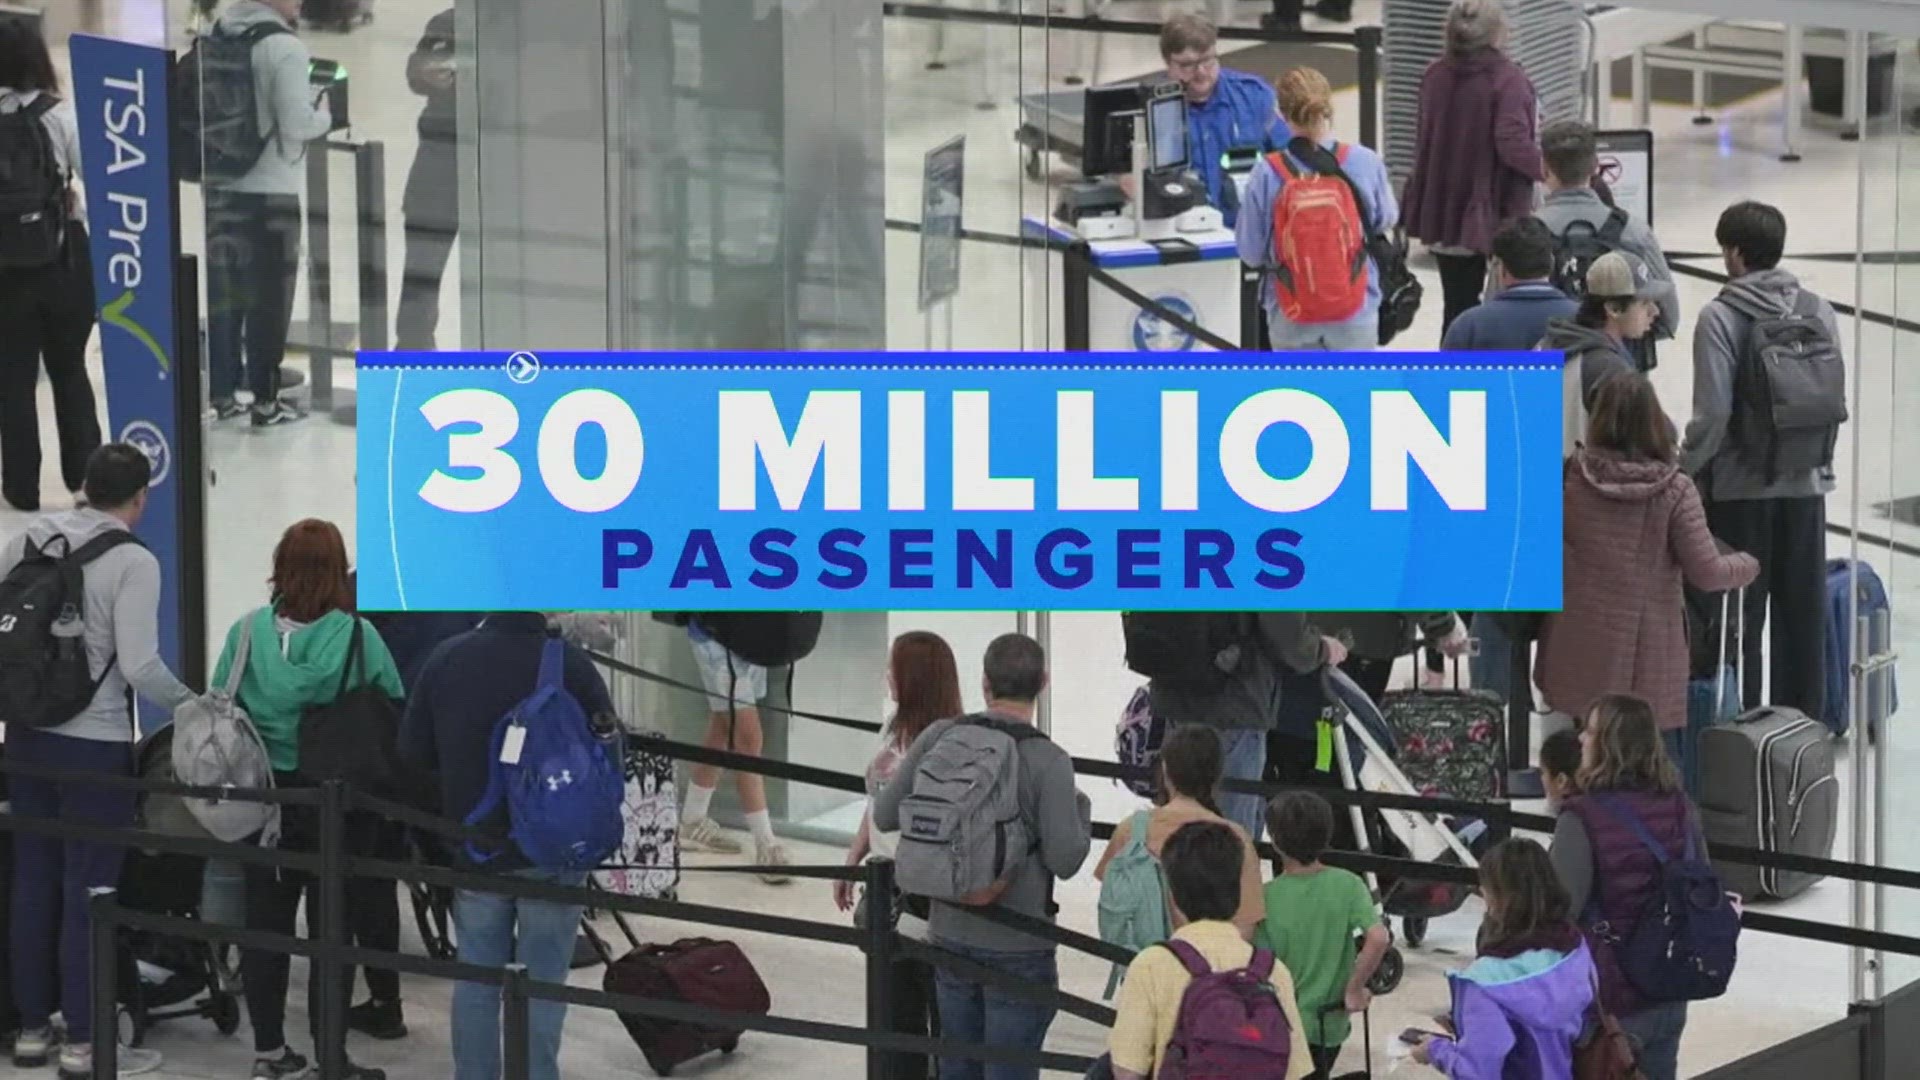 Analysts expect 3 million air passengers on the Sunday after Thanksgiving alone. If that number is reached, it will be a record.